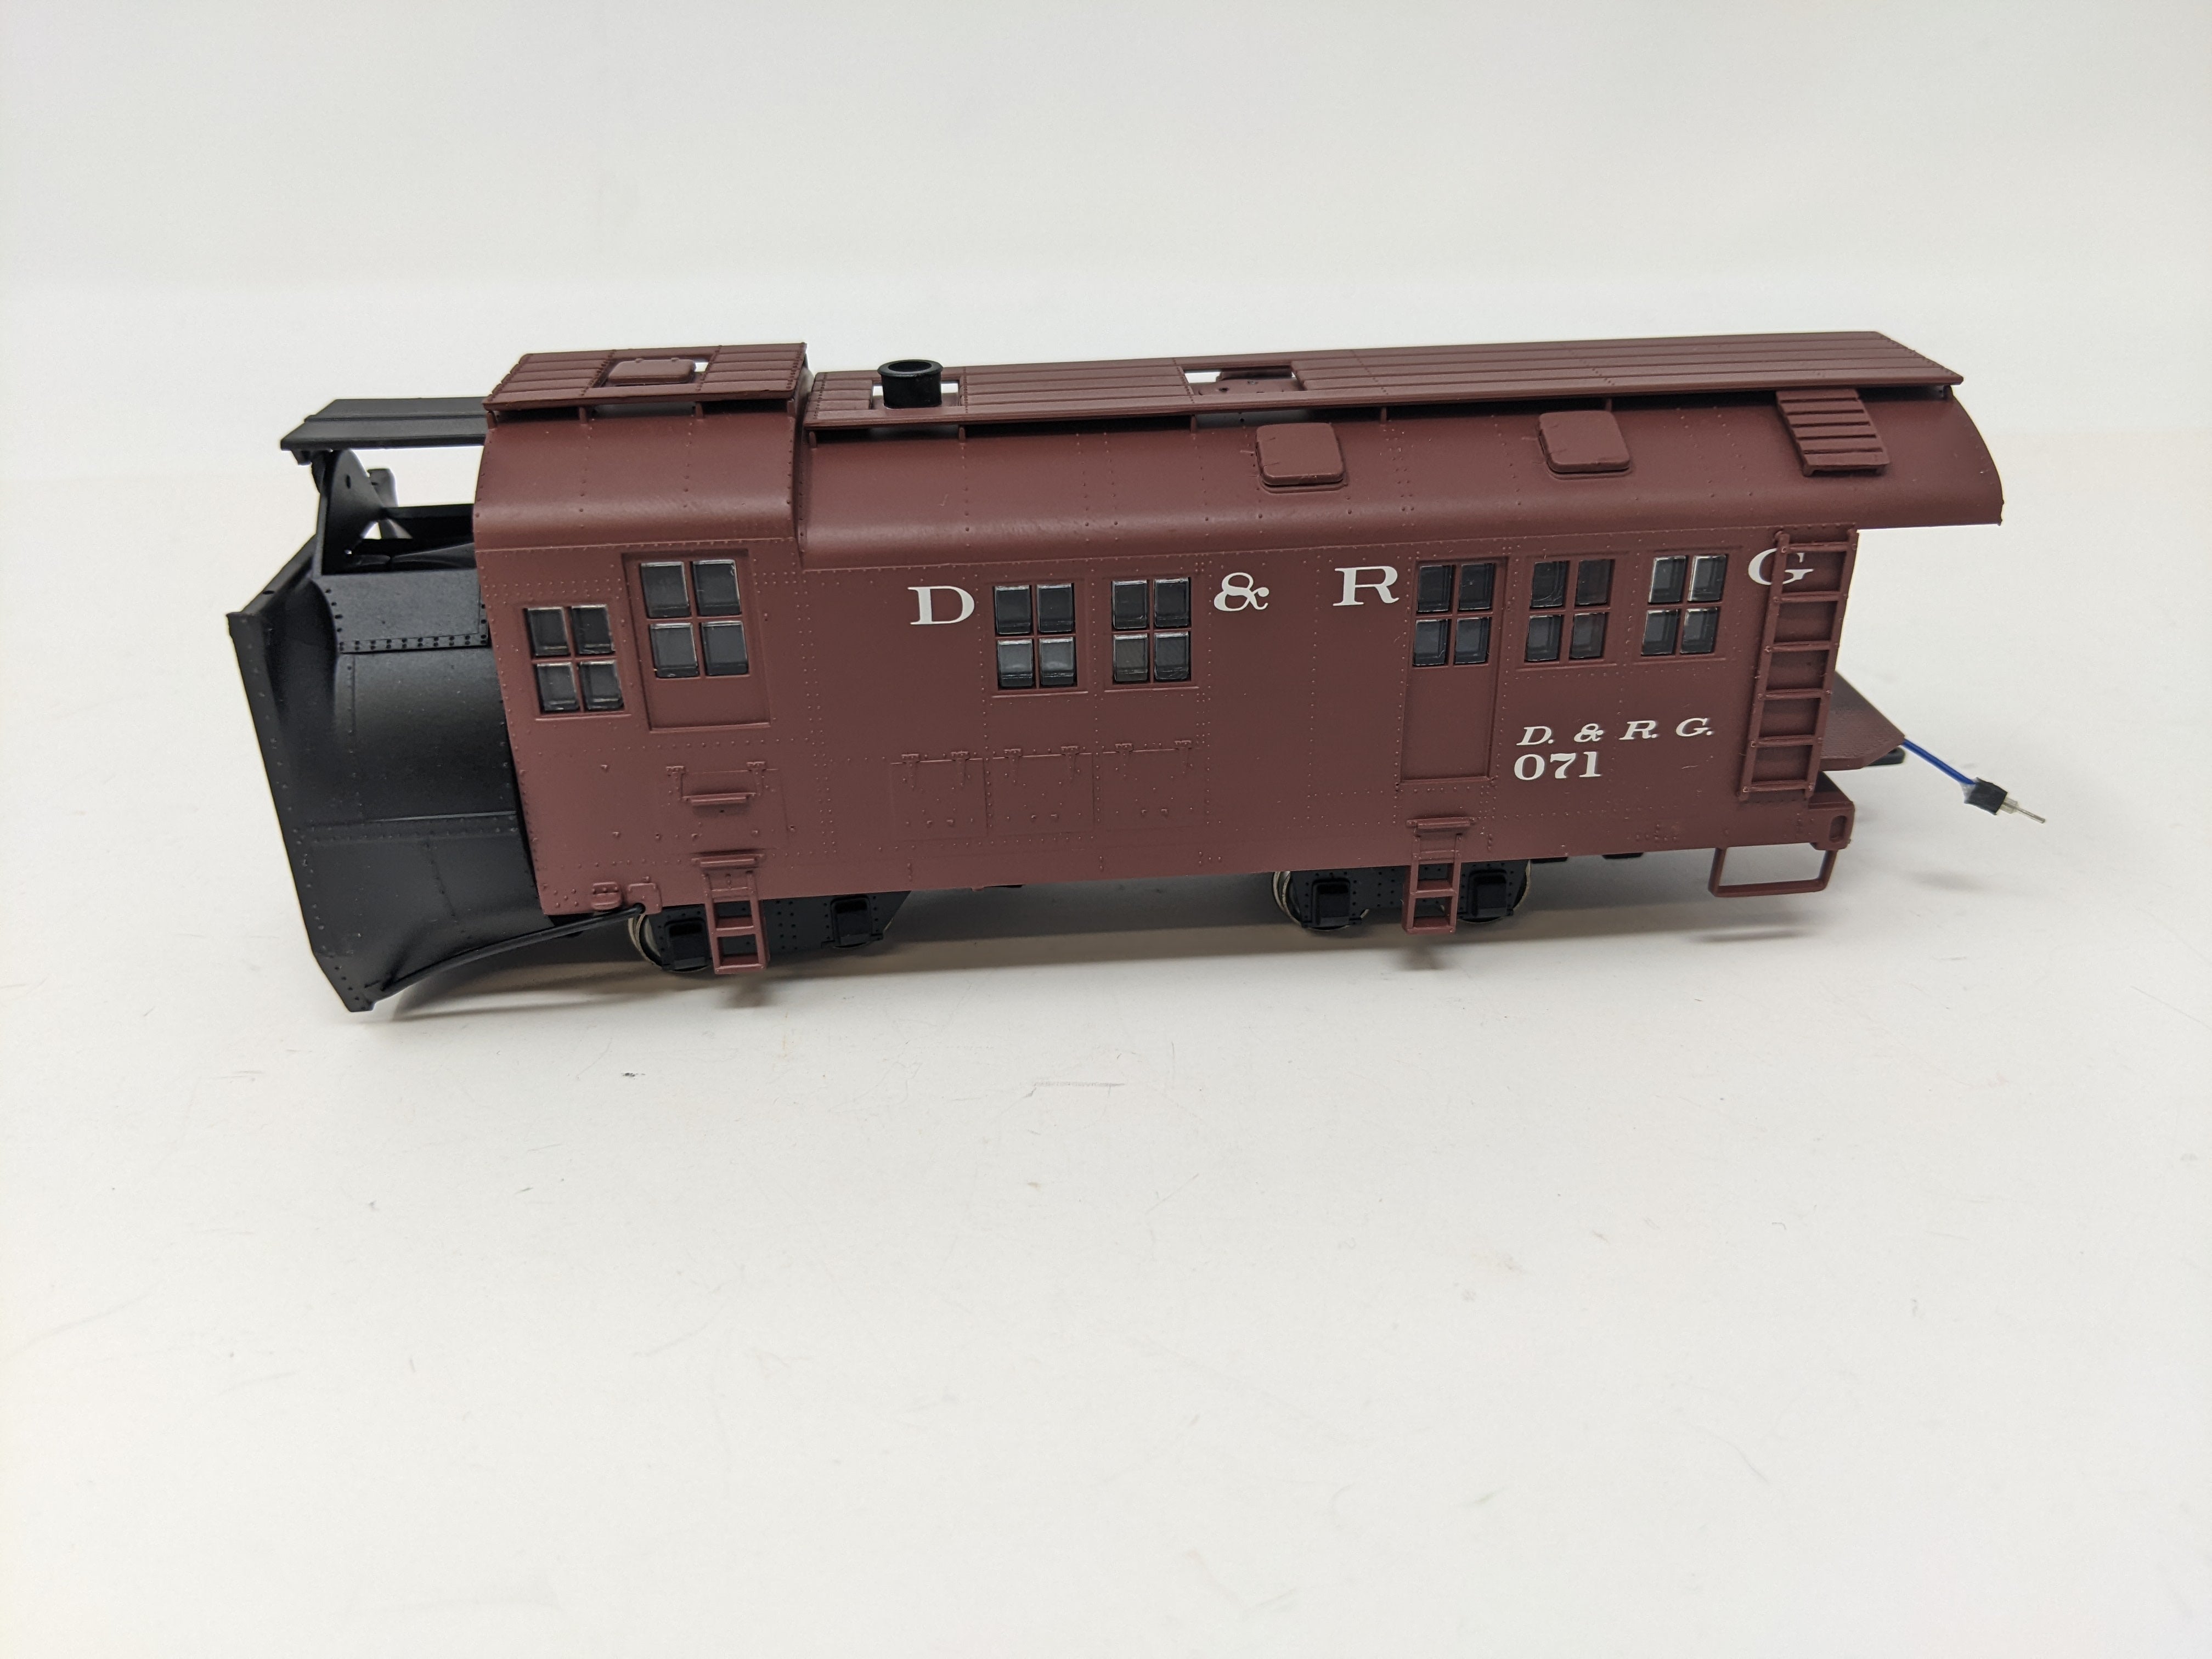 USED Walthers 932-1952 HO Scale, Alco Rotary Snow Plow, Denver and Rio Grande D&RG #071 (DC)